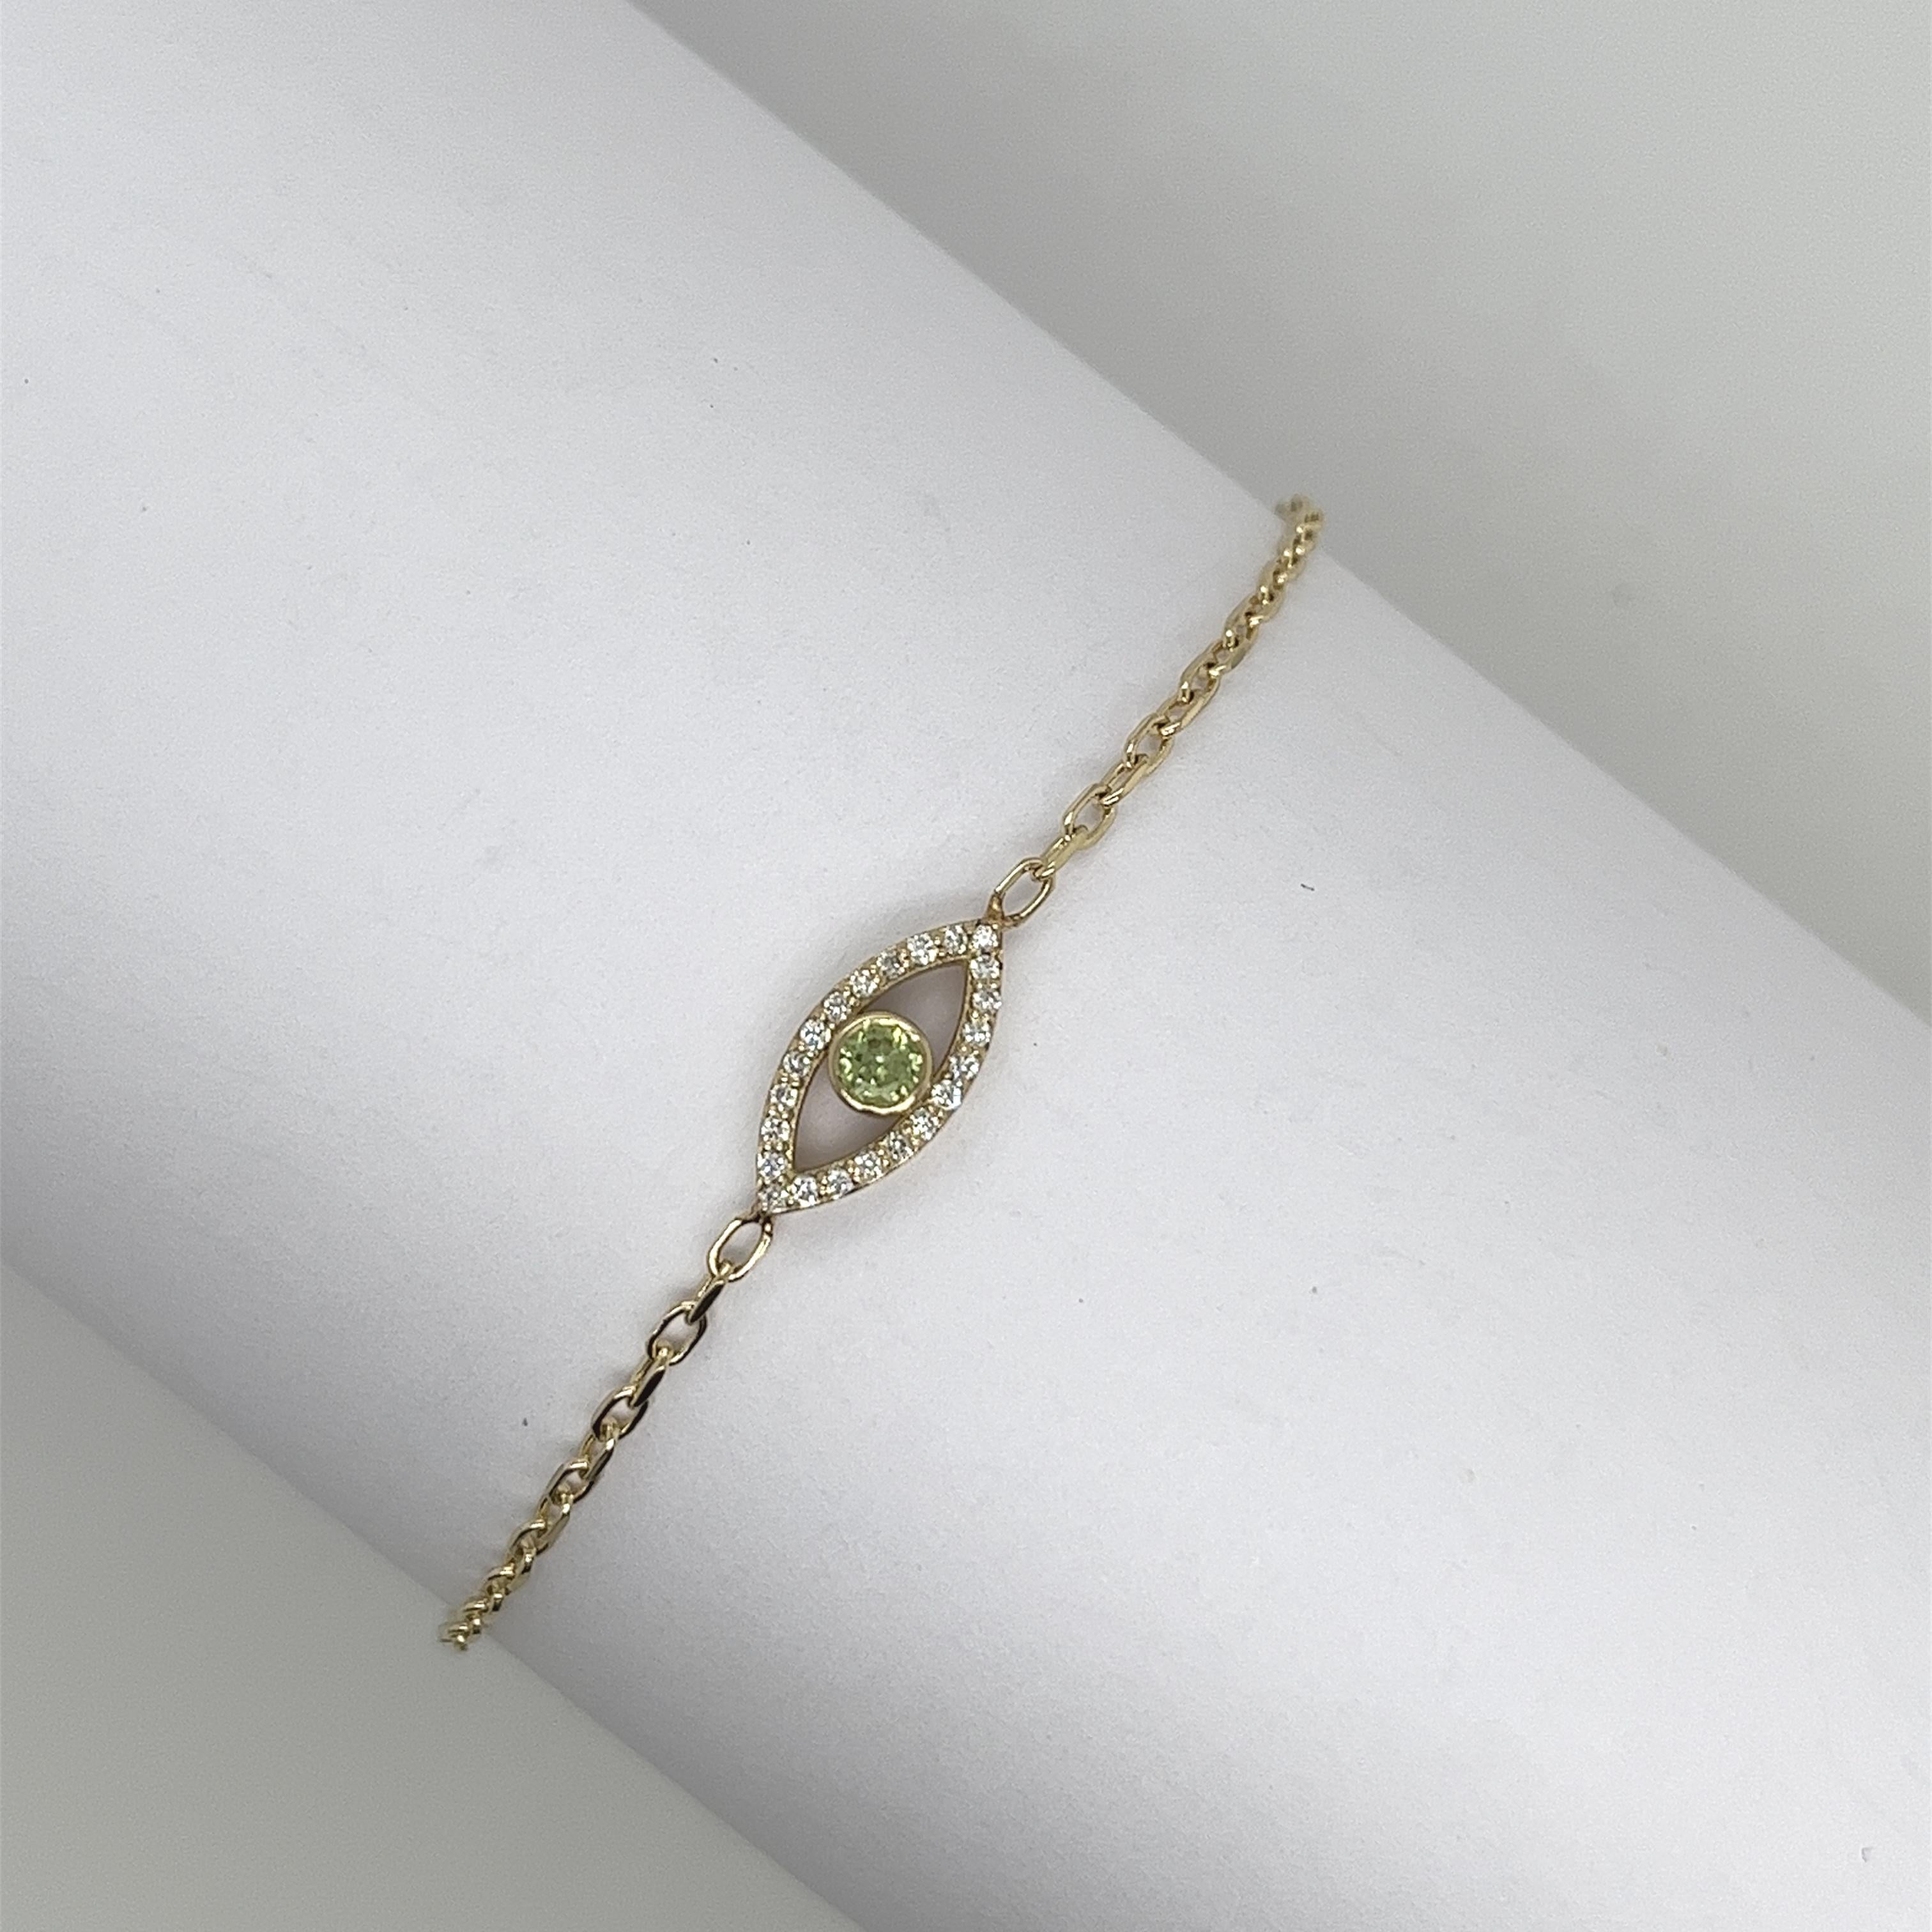 Made by Jewellery Cave- our exquisite 0.08ct diamond set and round peridot evil eye bracelet—
an enchanting fusion of style and symbolism. 
Crafted in 9ct yellow gold, the centrepiece of this mesmerizing bracelet is the striking Evil Eye charm,